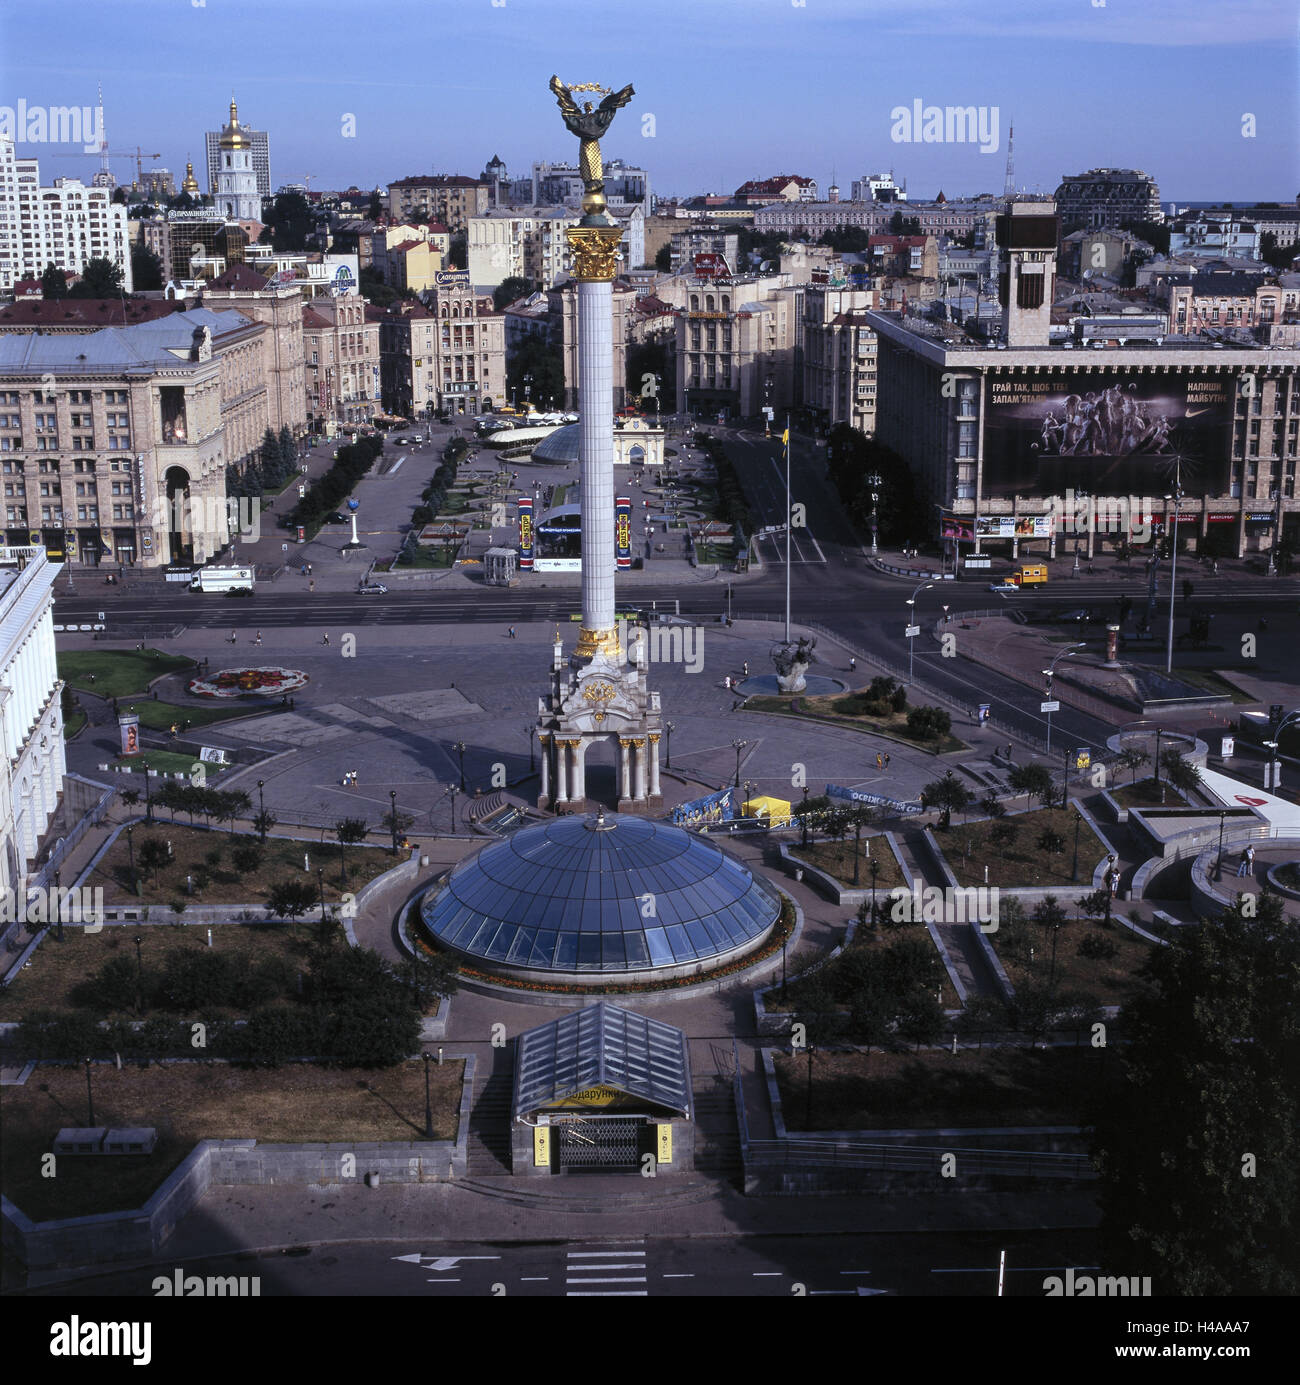 The Ukraine, Kiev, space the independence, independence monument, Stock Photo